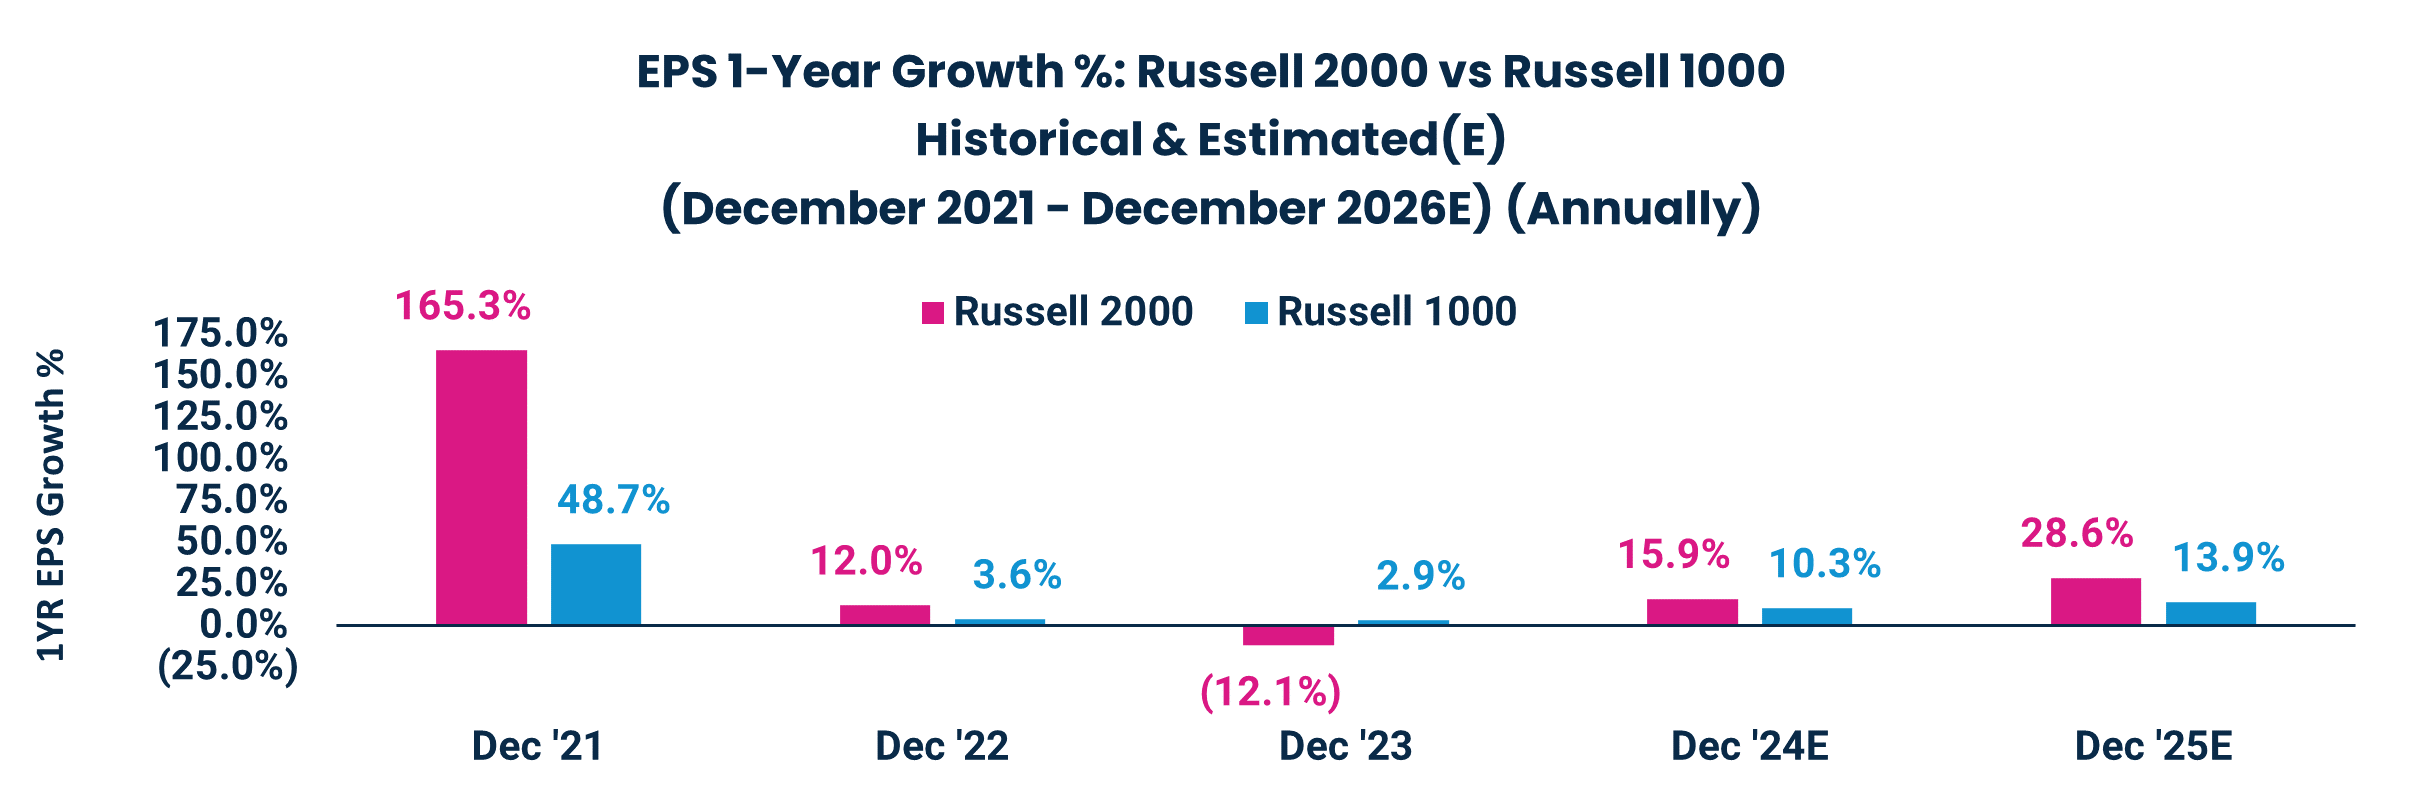 EPS 1-Year Growth %: Russell 2000 vs Russell 1000
Historical & Estimated(E)
(December 2021 - December 2026E) (Annually)